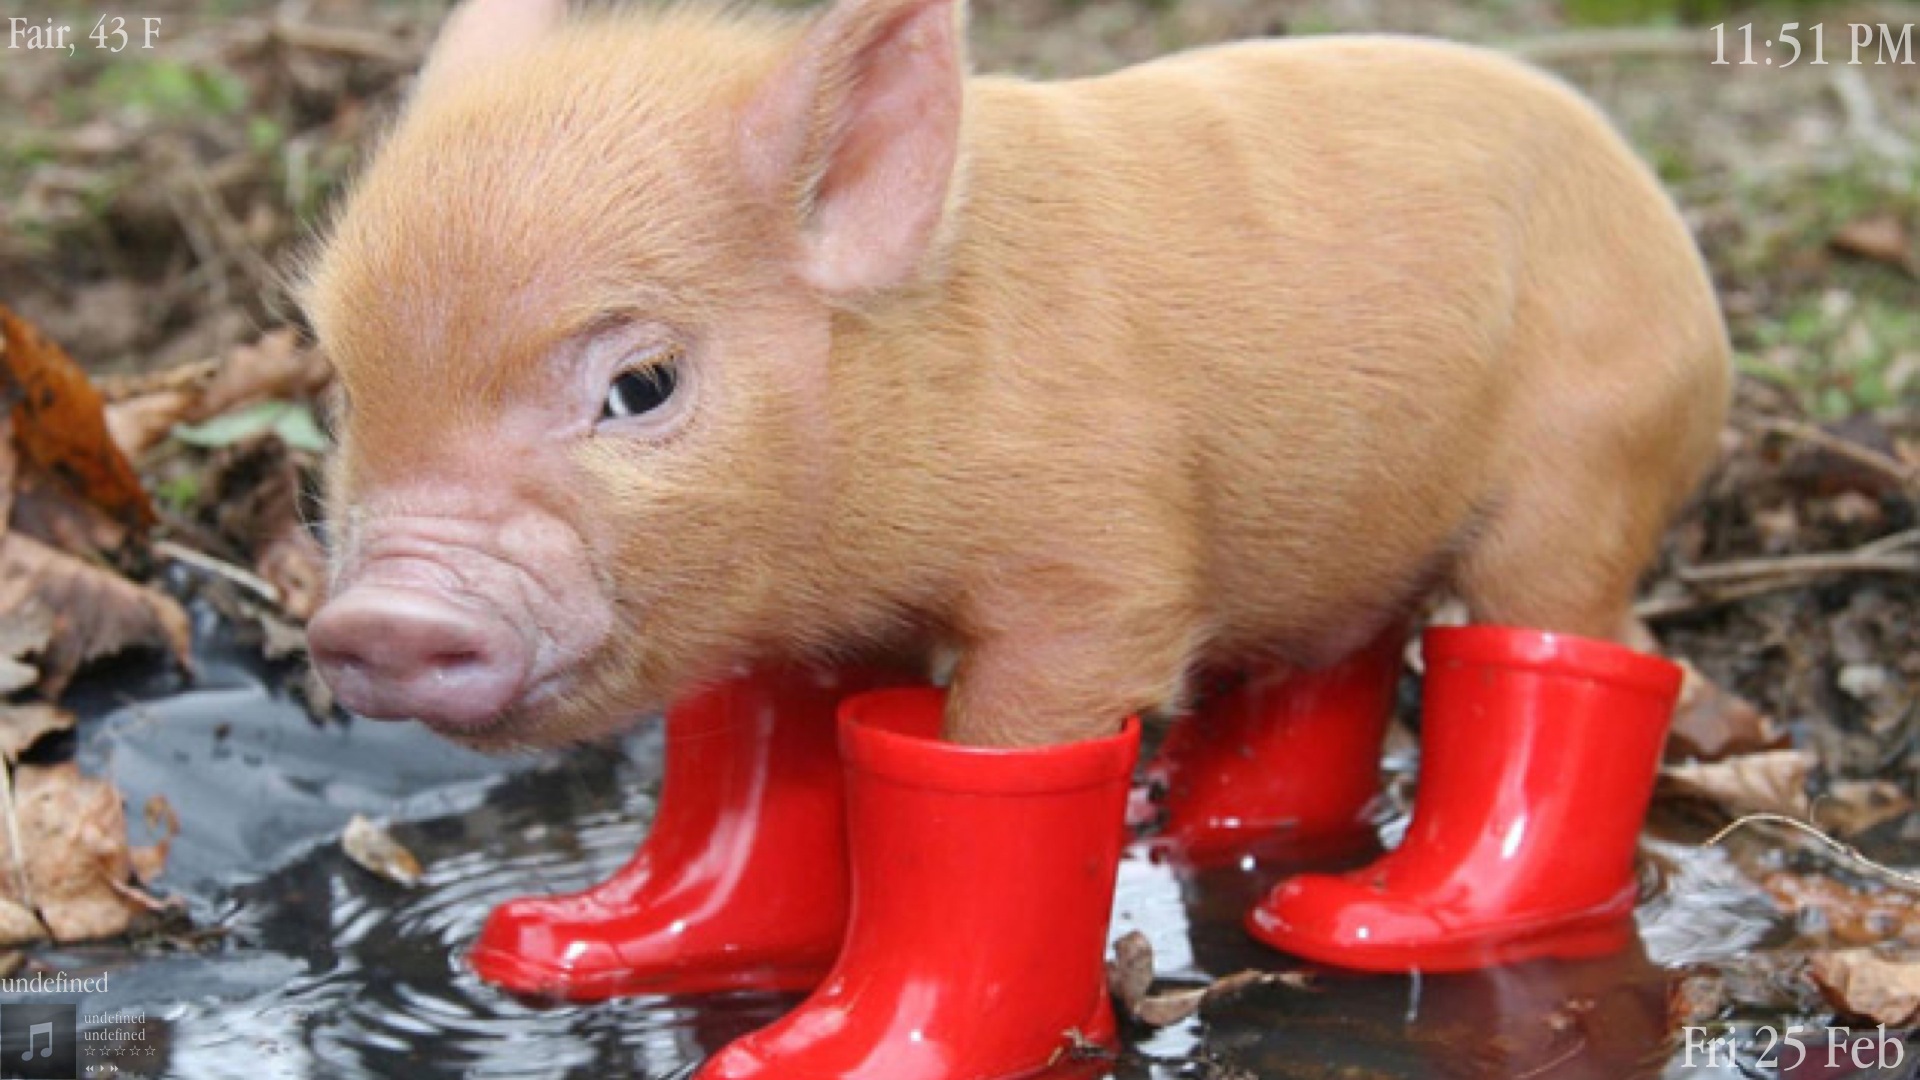 Animals   Pigs   Pig in boots 042780 jpg